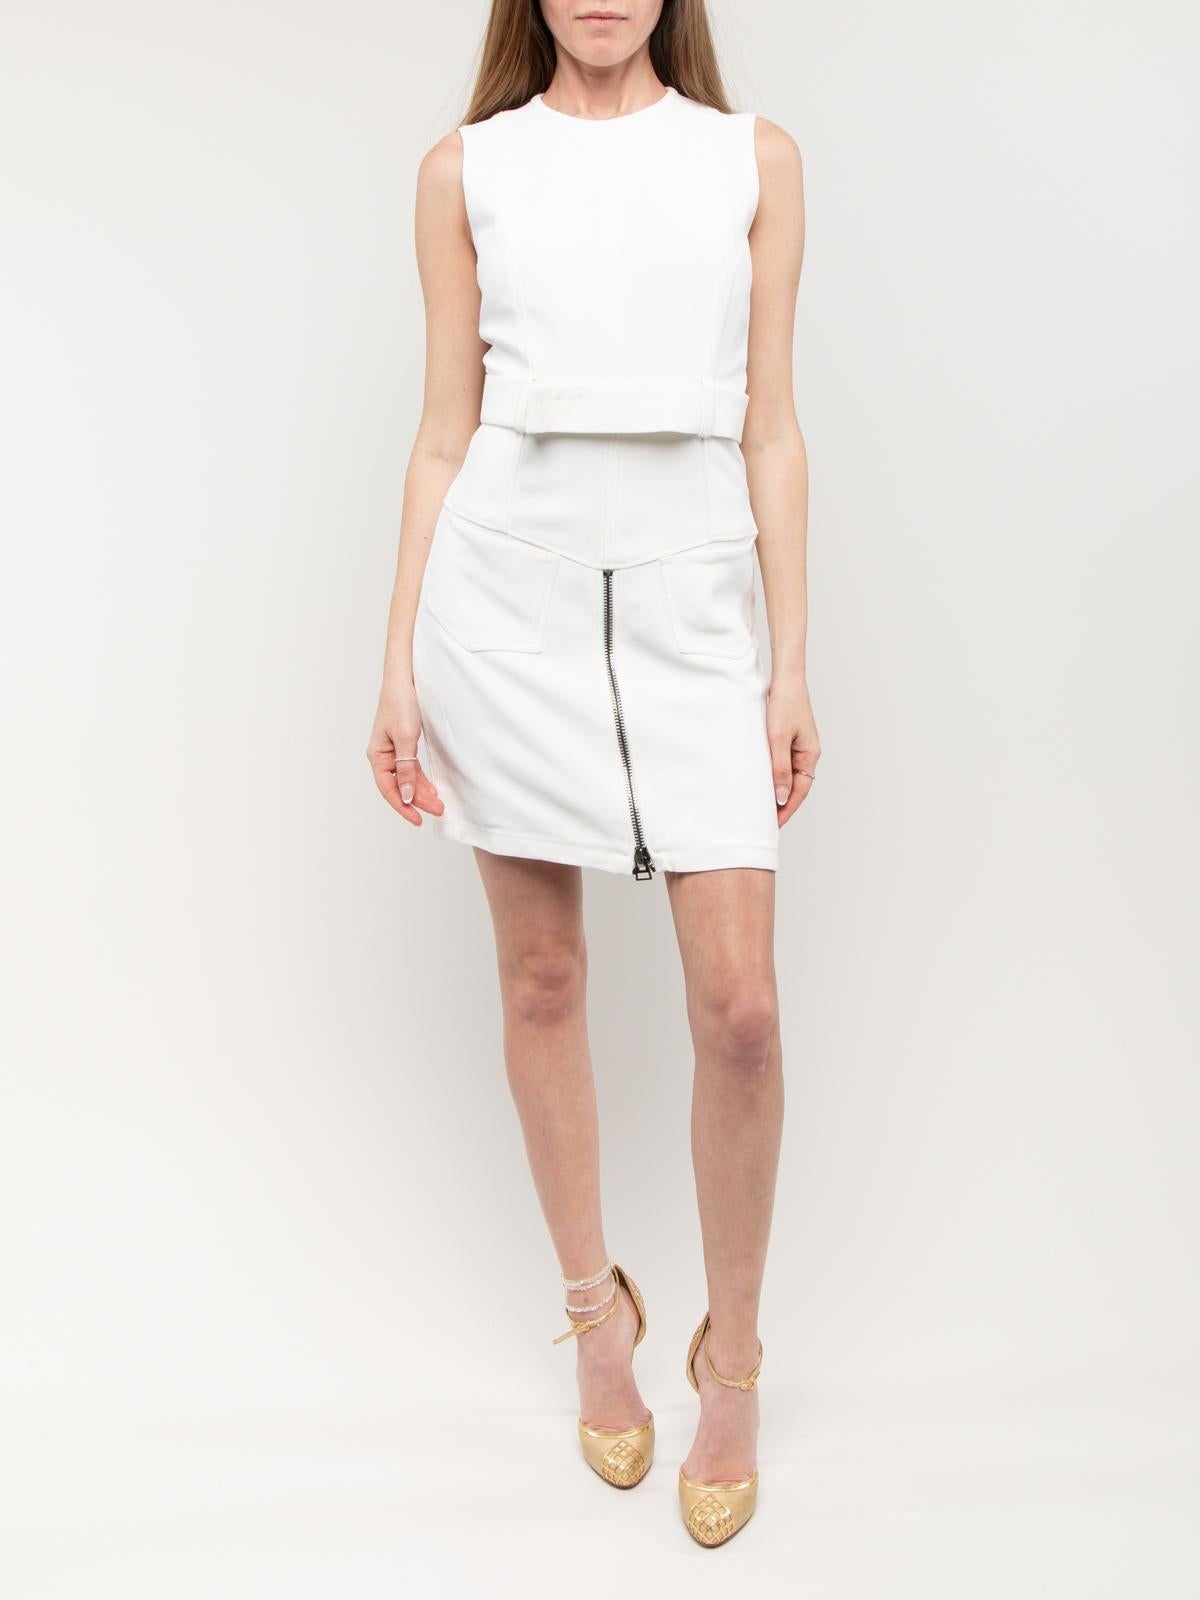 CONDITION is Good. Some wear and pilling to dress is evident. Slightly visible stains on the interior & exterior of this used Tom Ford designer resale item. Details White Viscose Regular fit Sleeveless 2 Large pockets near waist Round neckline Zip